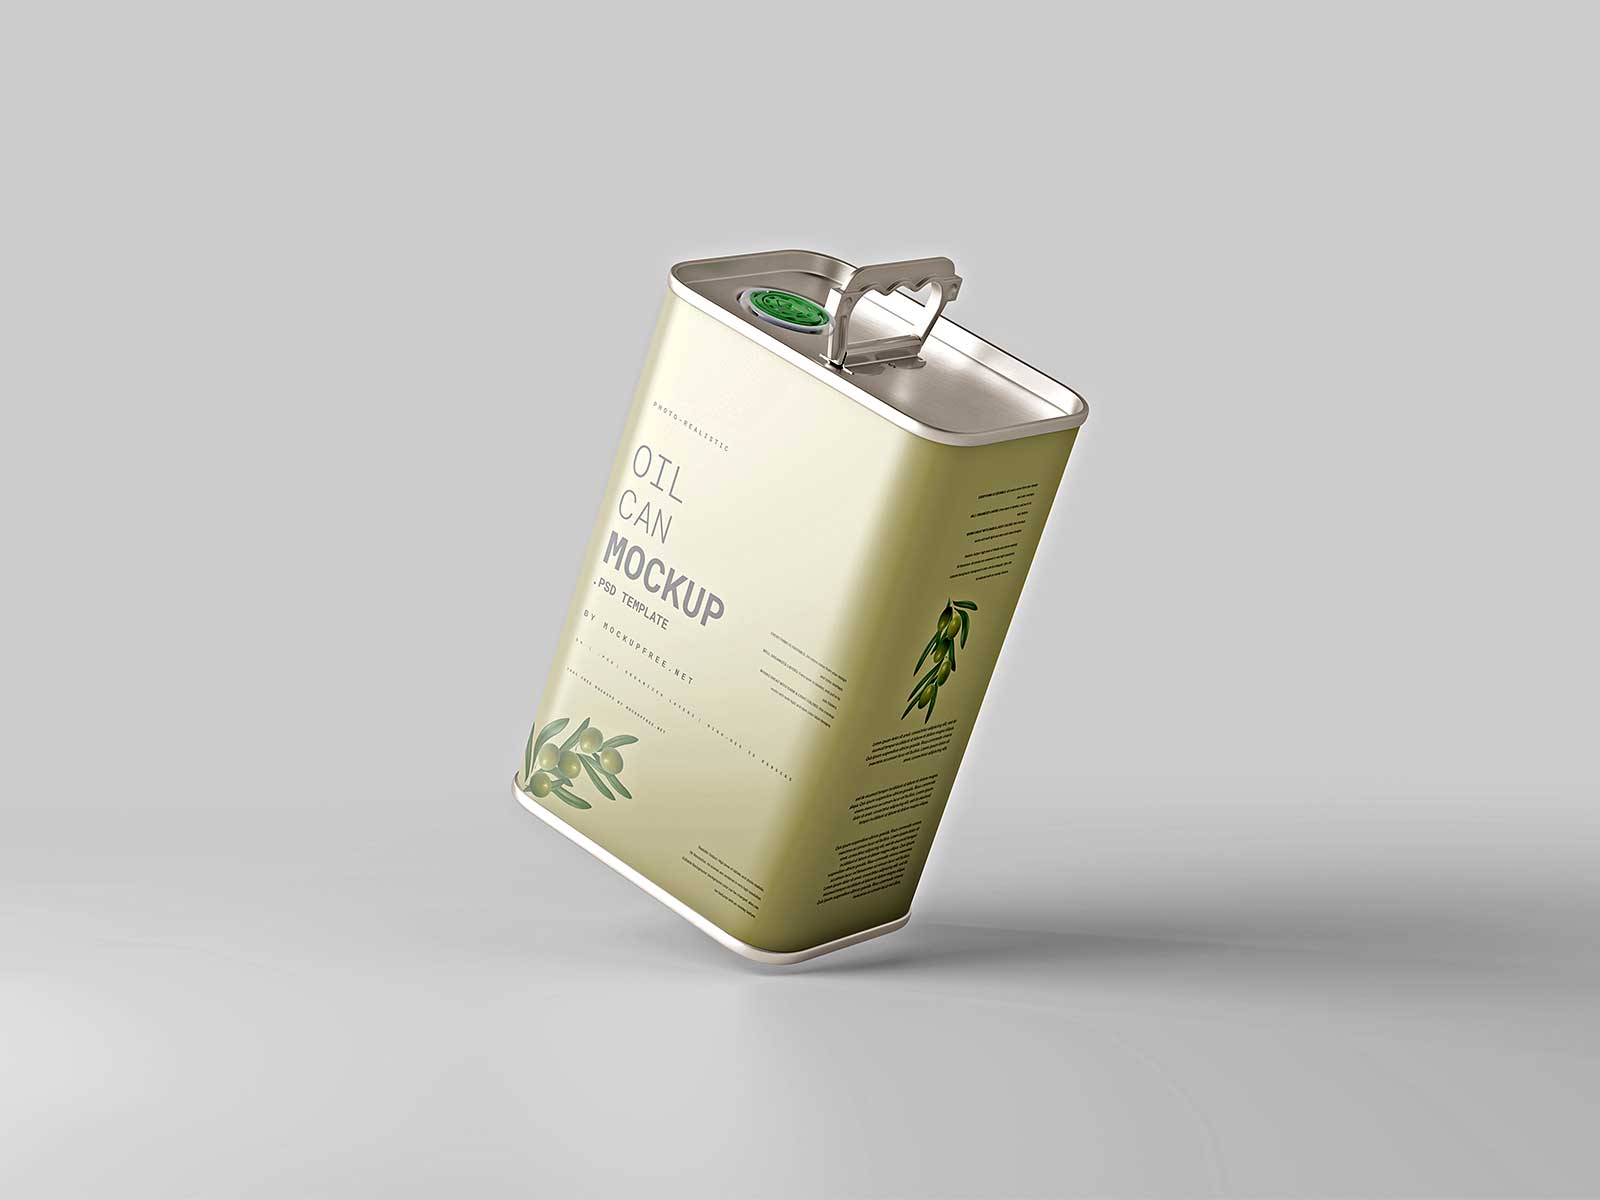 Oil Can Mockups Free PSD: Elevate Your Packaging Design